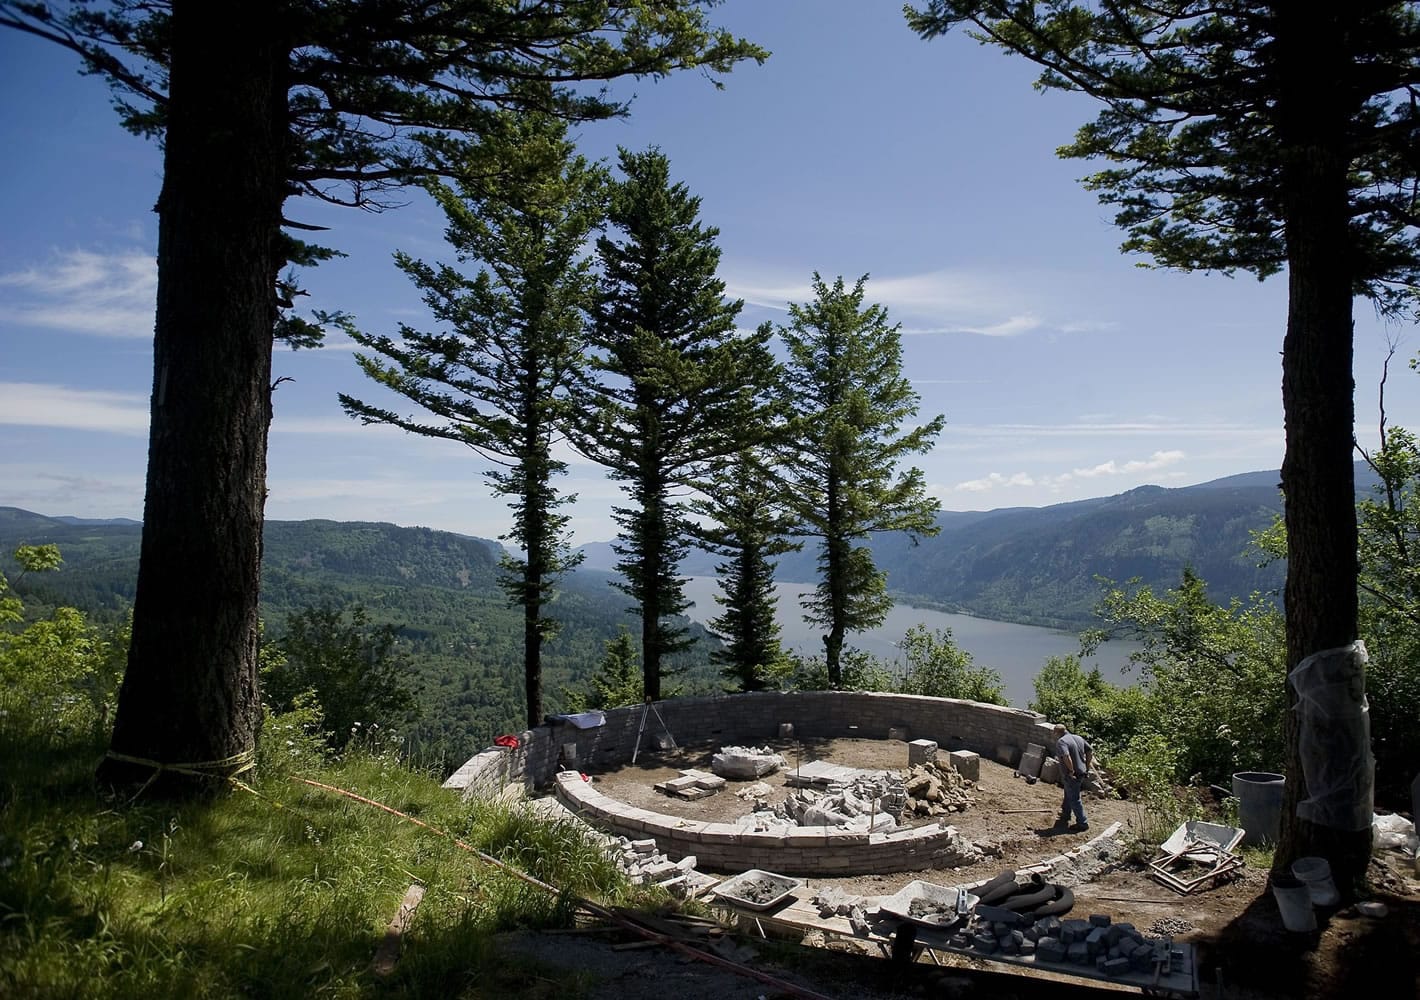 The Columbia River Gorge National Scenic Area marked its 25th anniversary in 2011.